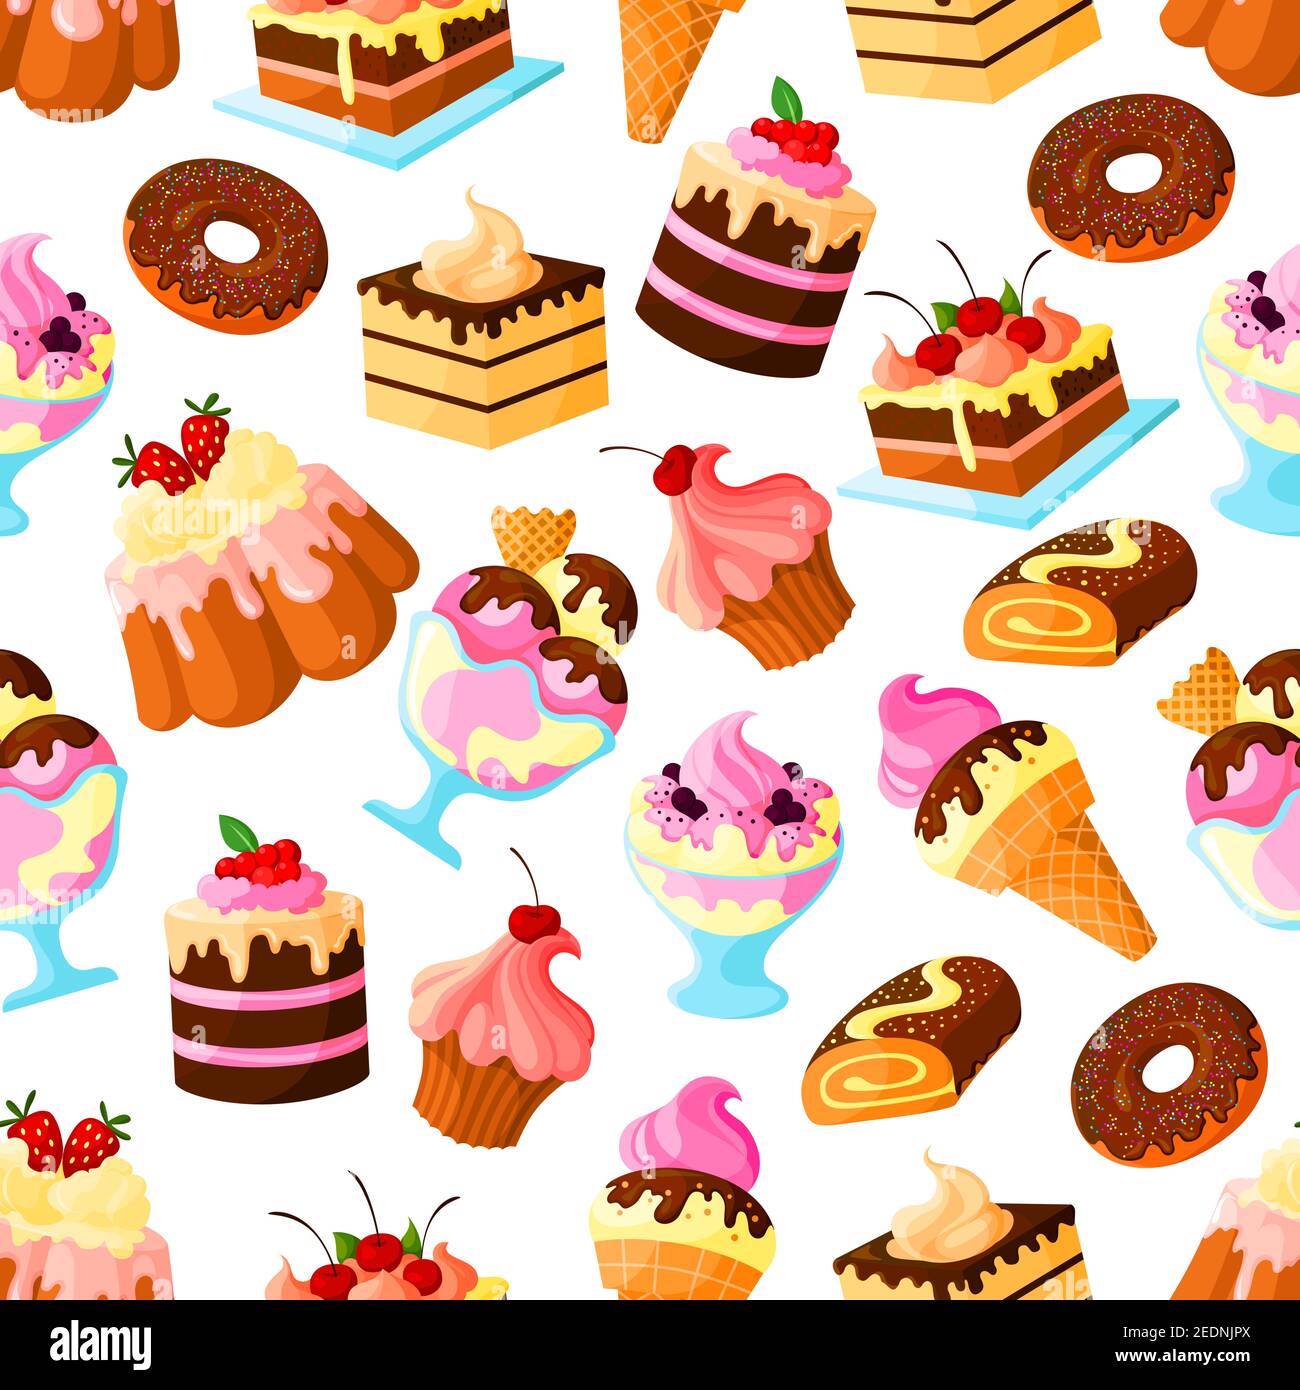 Pastry cakes and bakery desserts vector seamless pattern of biscuit cupcake or cheesecake, ice cream and donut or muffin, waffles and wafer tart, choc Stock Vector